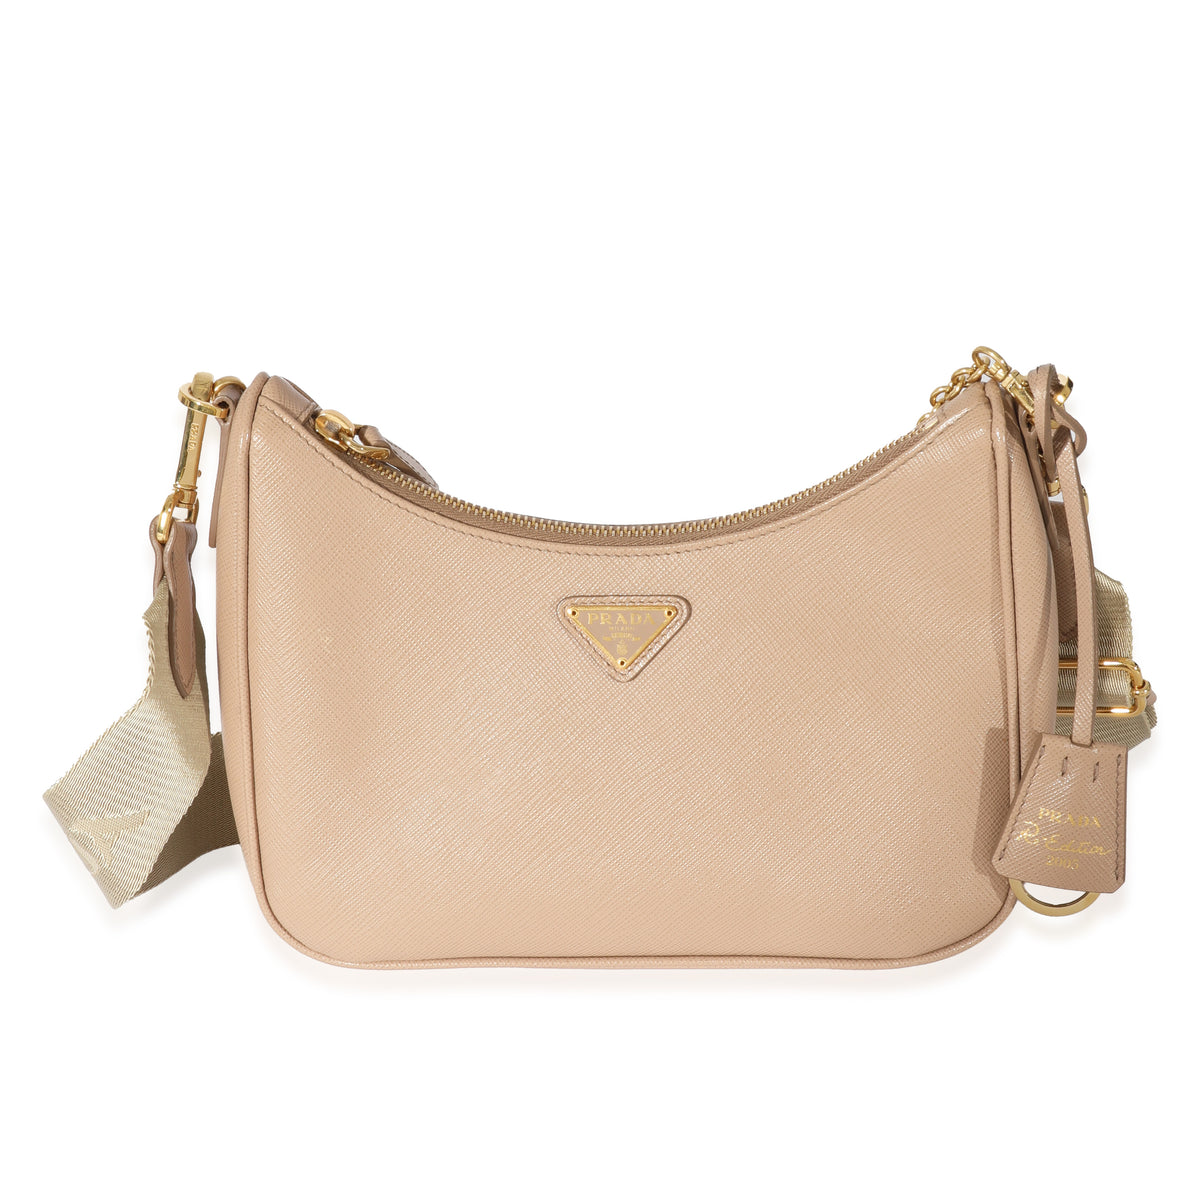 Prada Cameo Beige Saffiano and leather wallet with shoulder strap